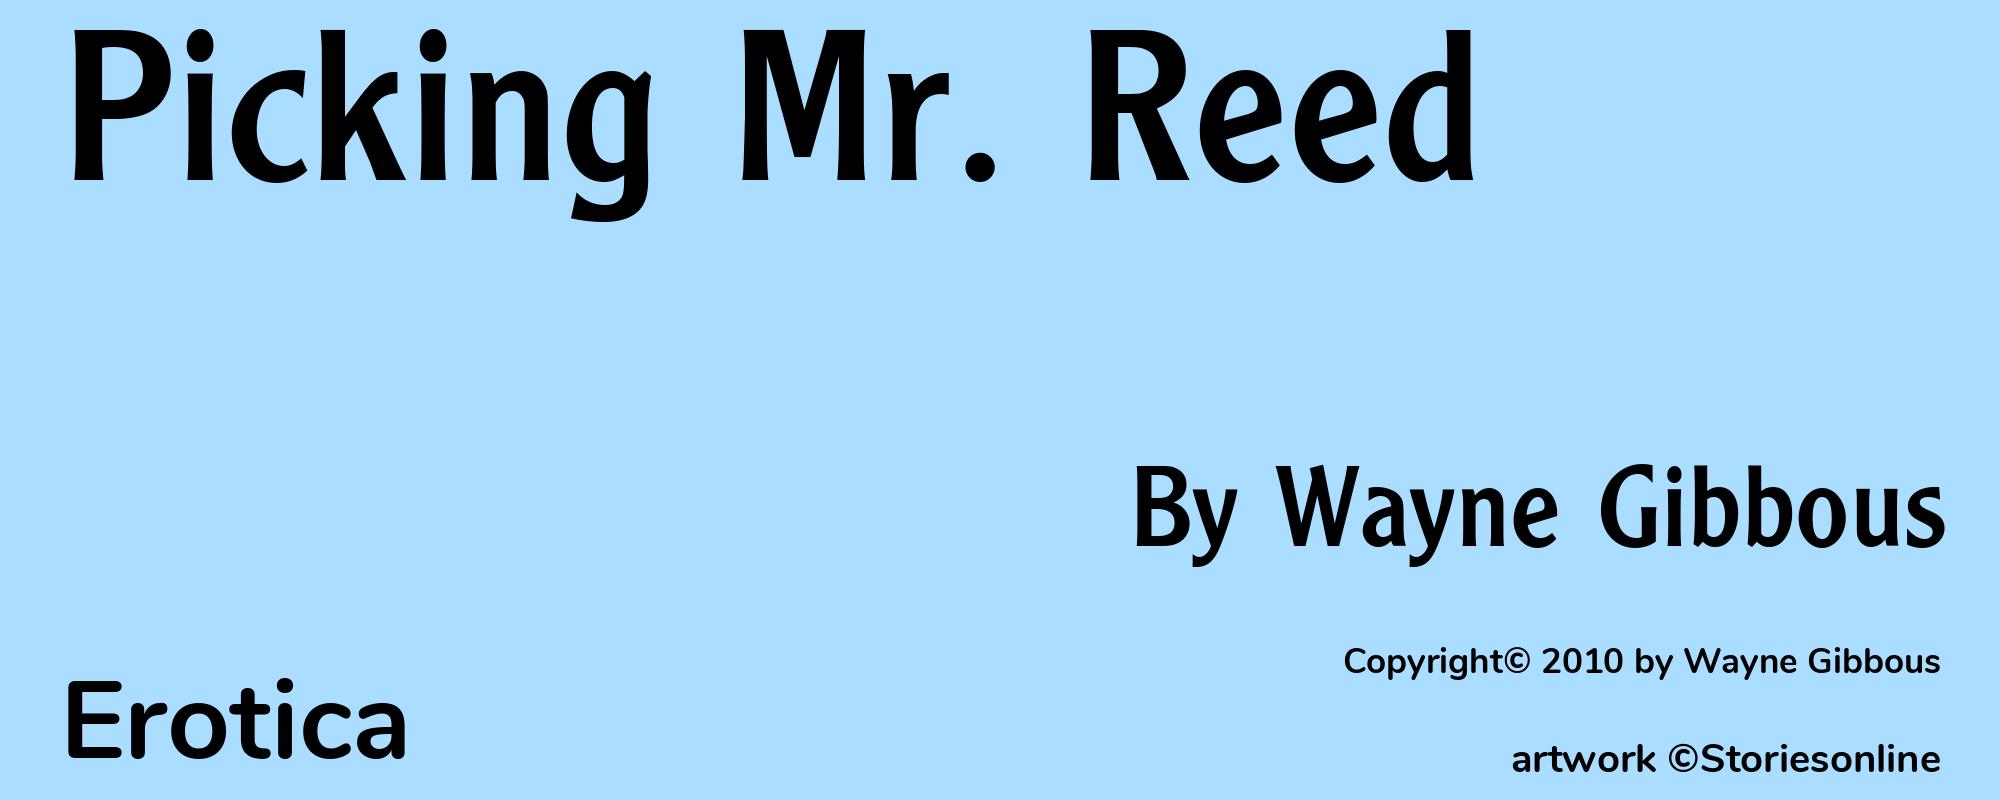 Picking Mr. Reed - Cover